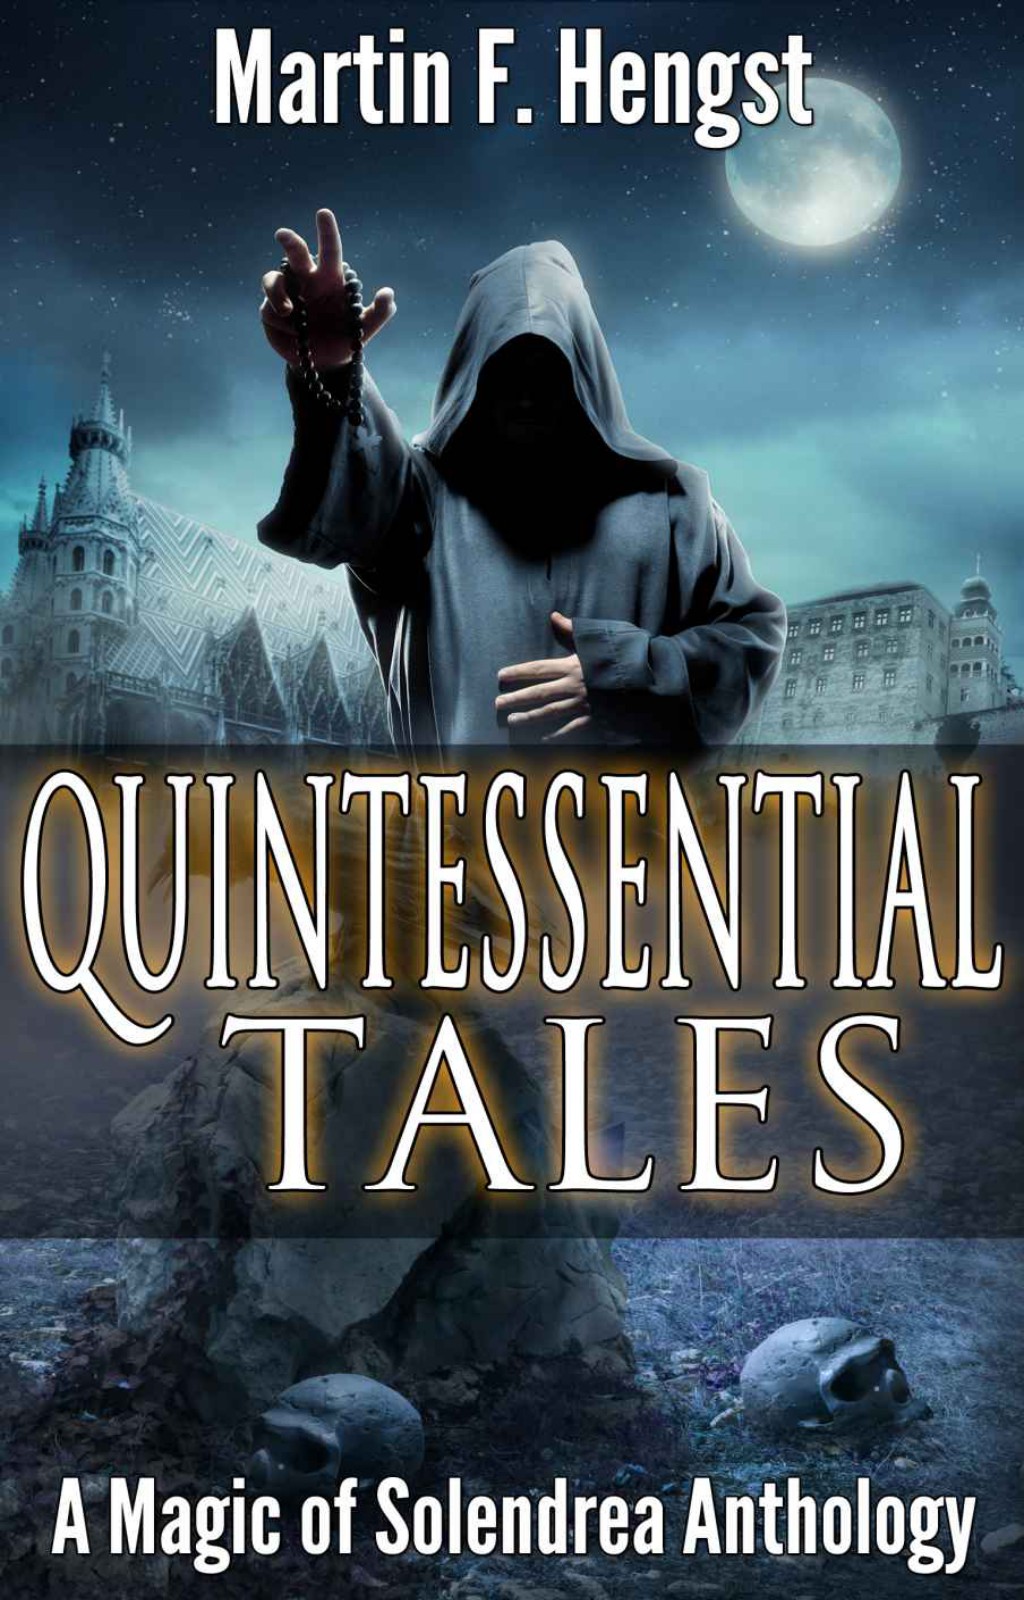 Quintessential Tales: A Magic of Solendrea Anthology by Martin Hengst